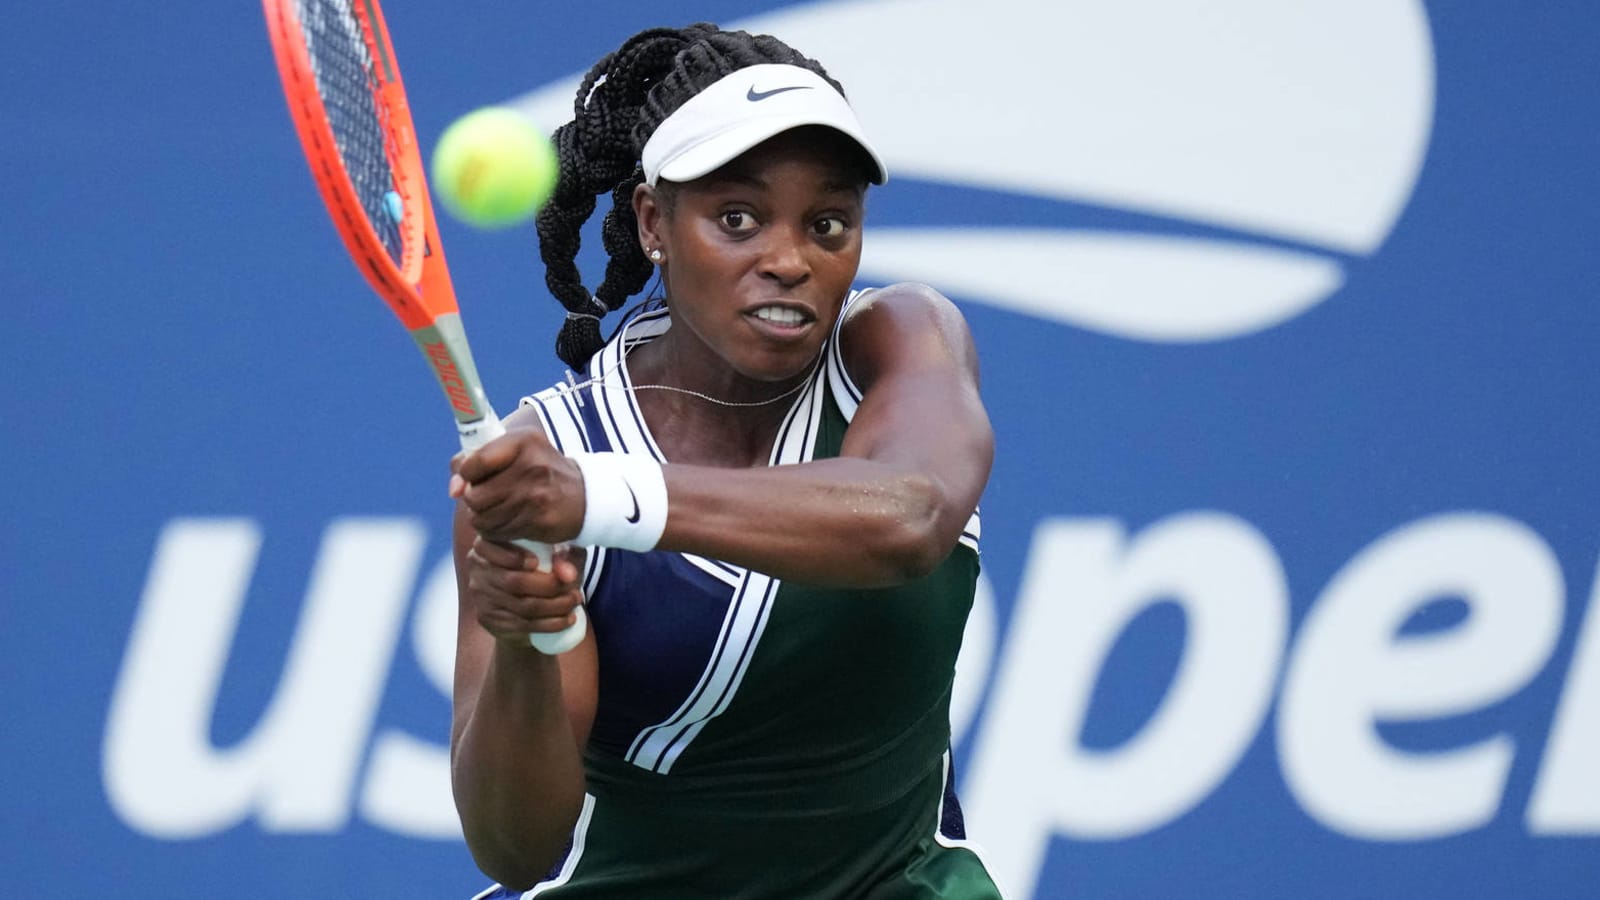 Sloane Stephens reveals threatening messages after loss